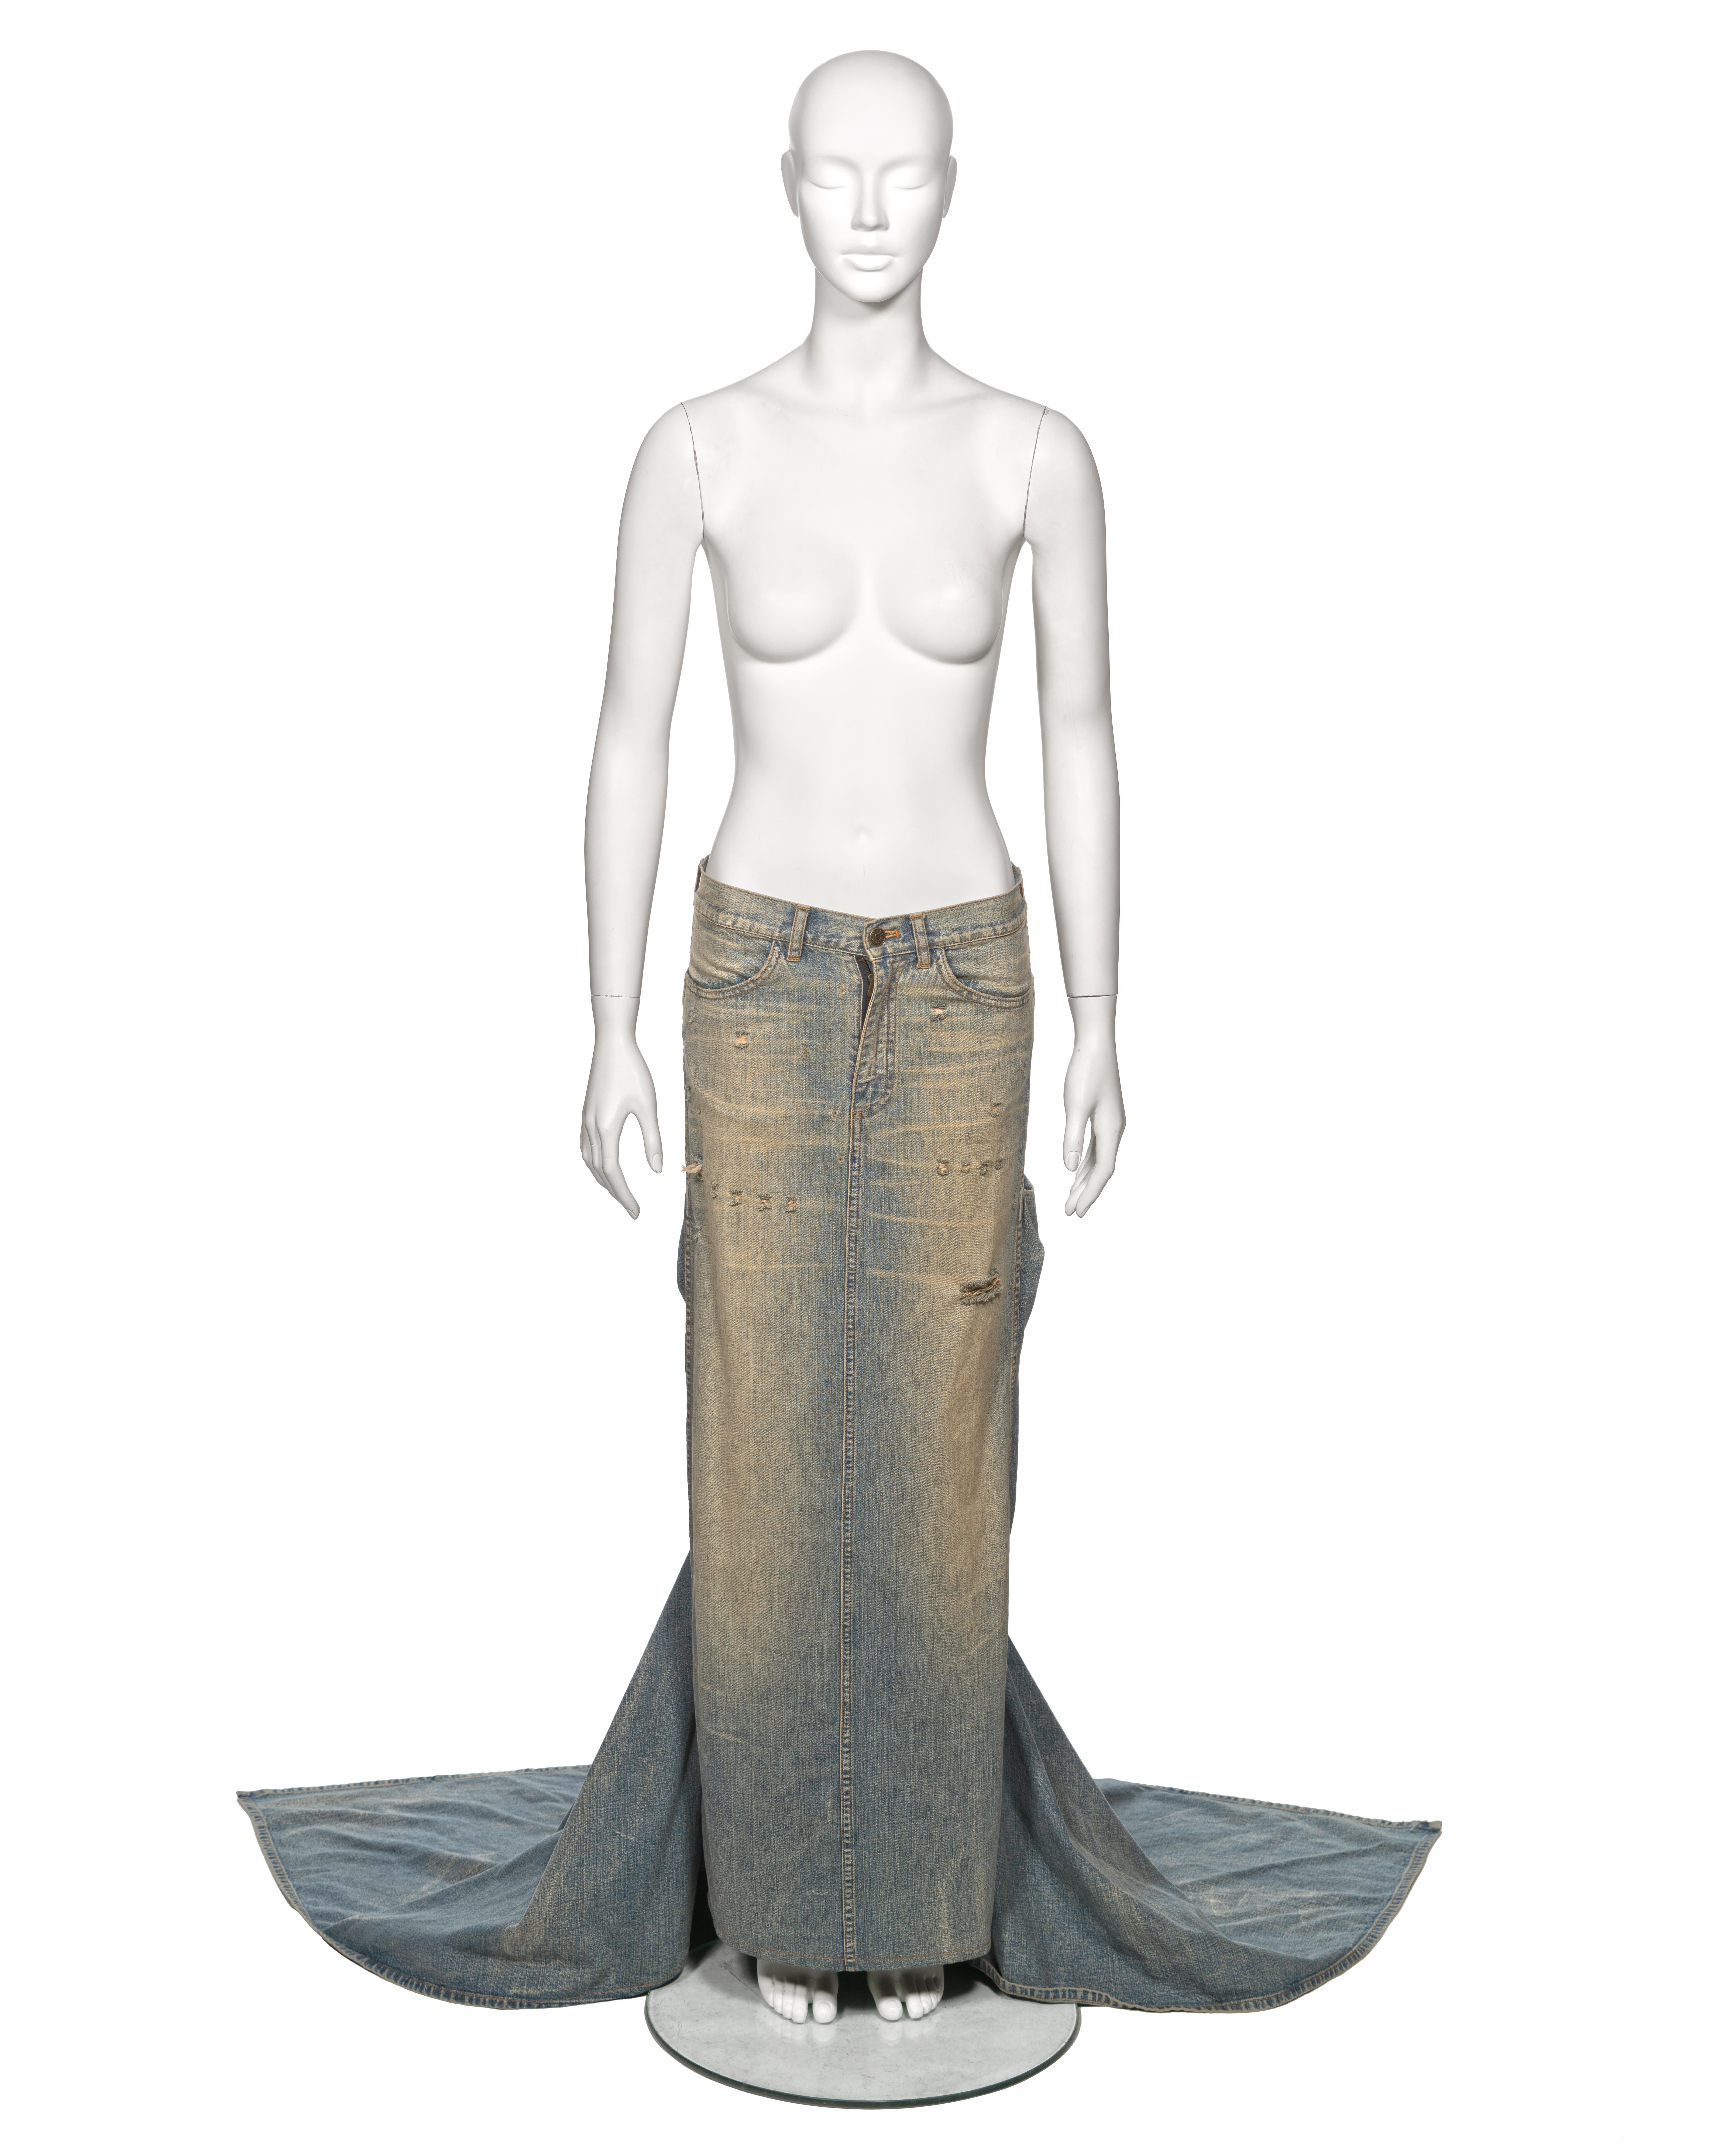 ▪ Archival Ralph Lauren Purple Label Runway Skirt
▪ Spring-Summer 2003
▪ Crafted from distressed heavyweight sand-washed denim
▪ Boasts a floor-length silhouette with two long trains extending to the rear
▪ Features a mid-rise waist with a straight